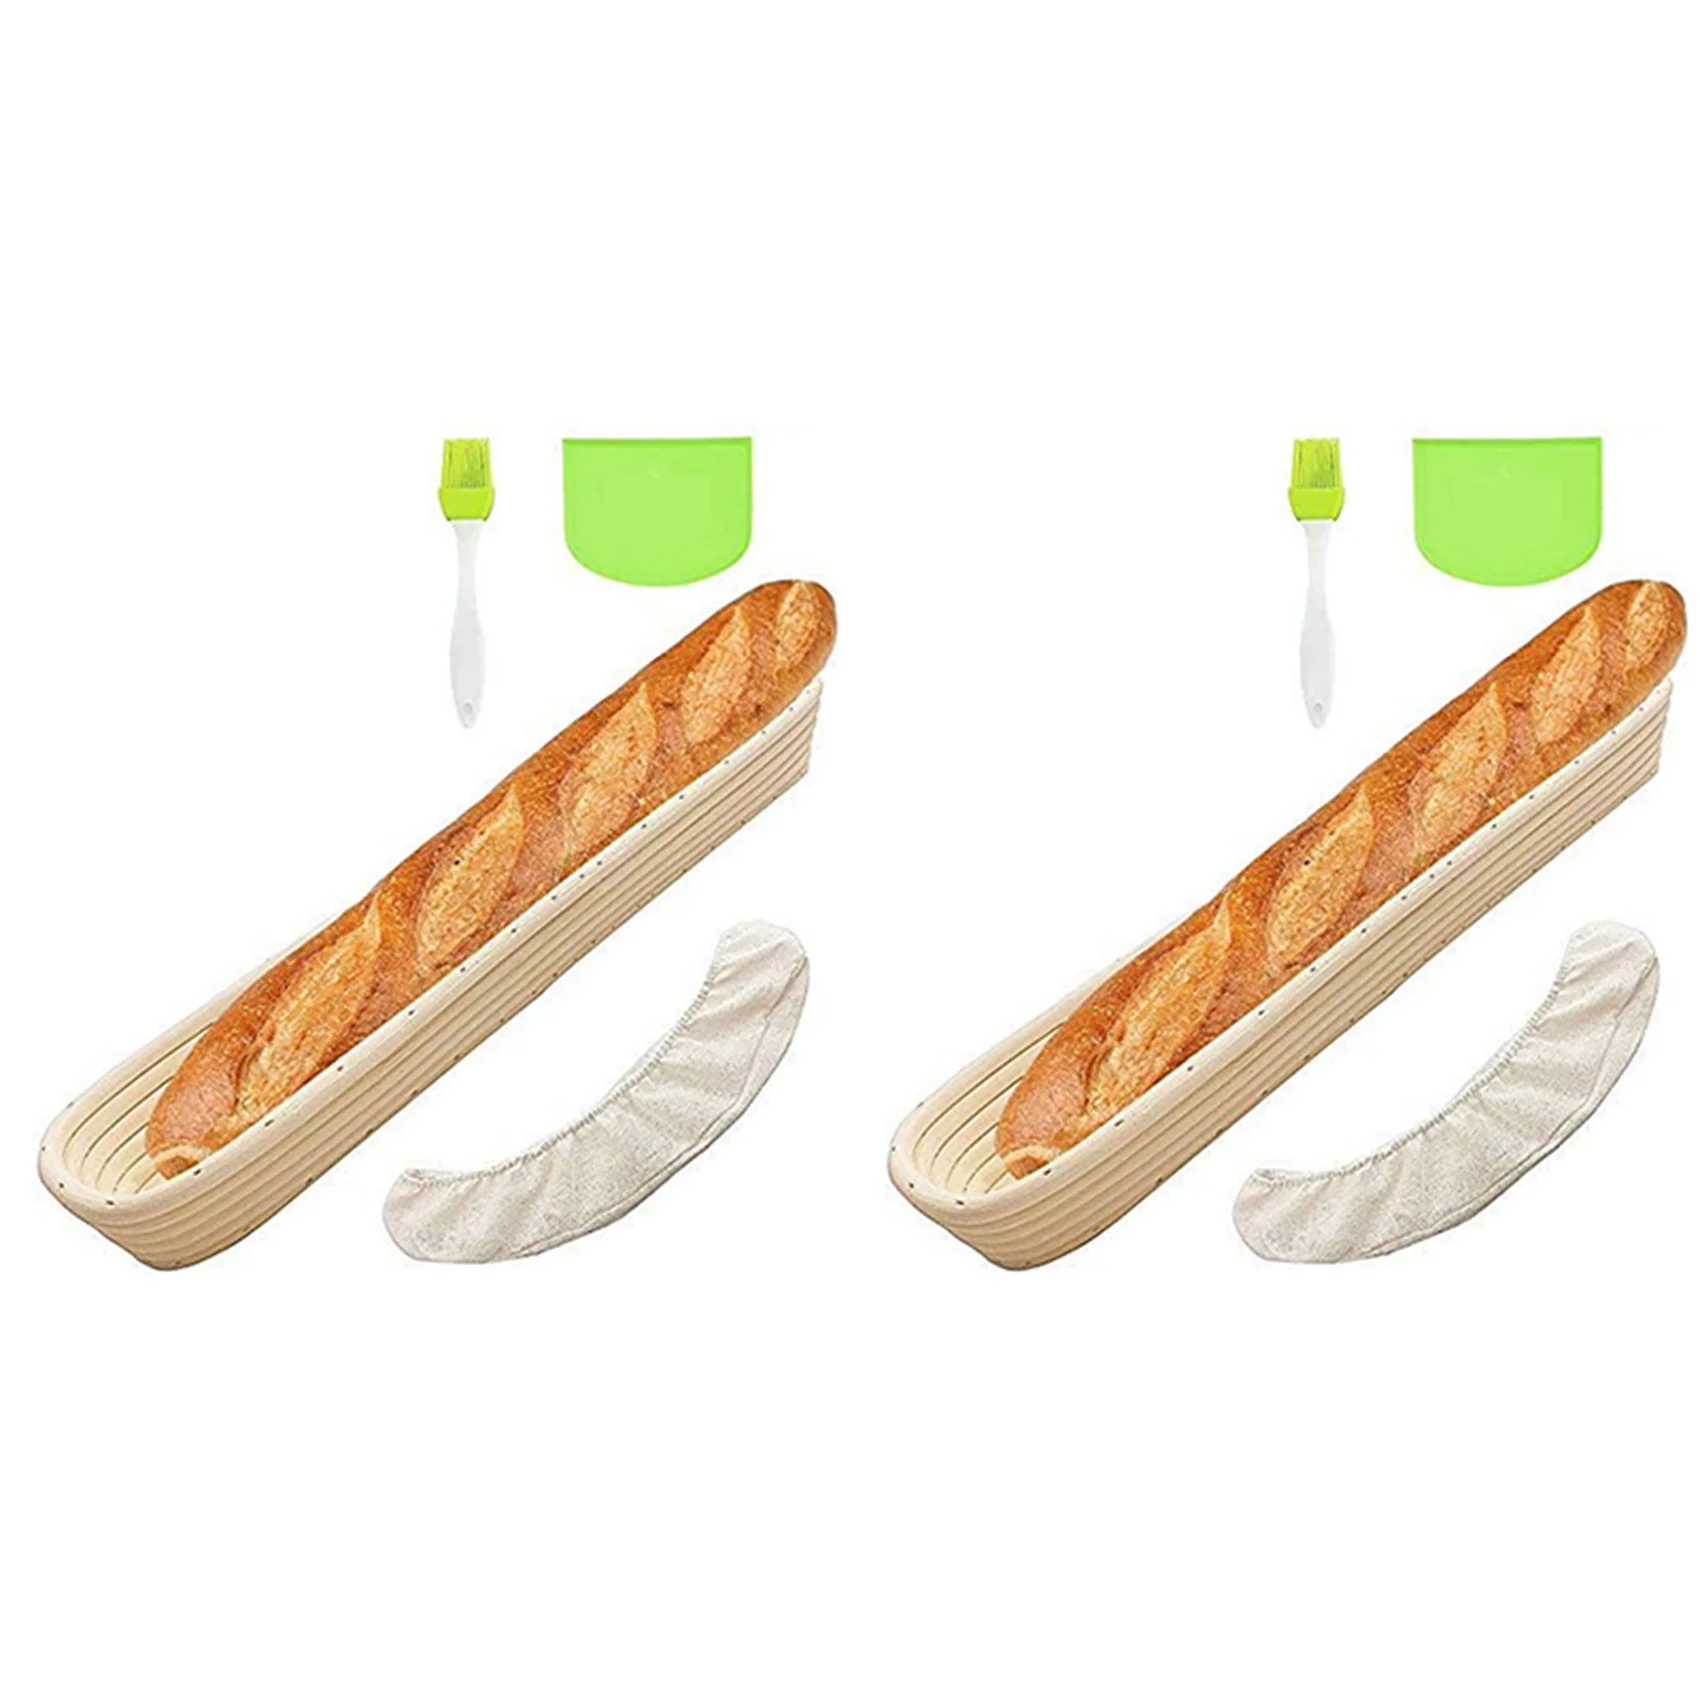 

2X Oval Bread Banneton Proofing Basket Baking Bowl Set with Dough Scraper Linen Liner Cloth Silicon Brush for Bakers